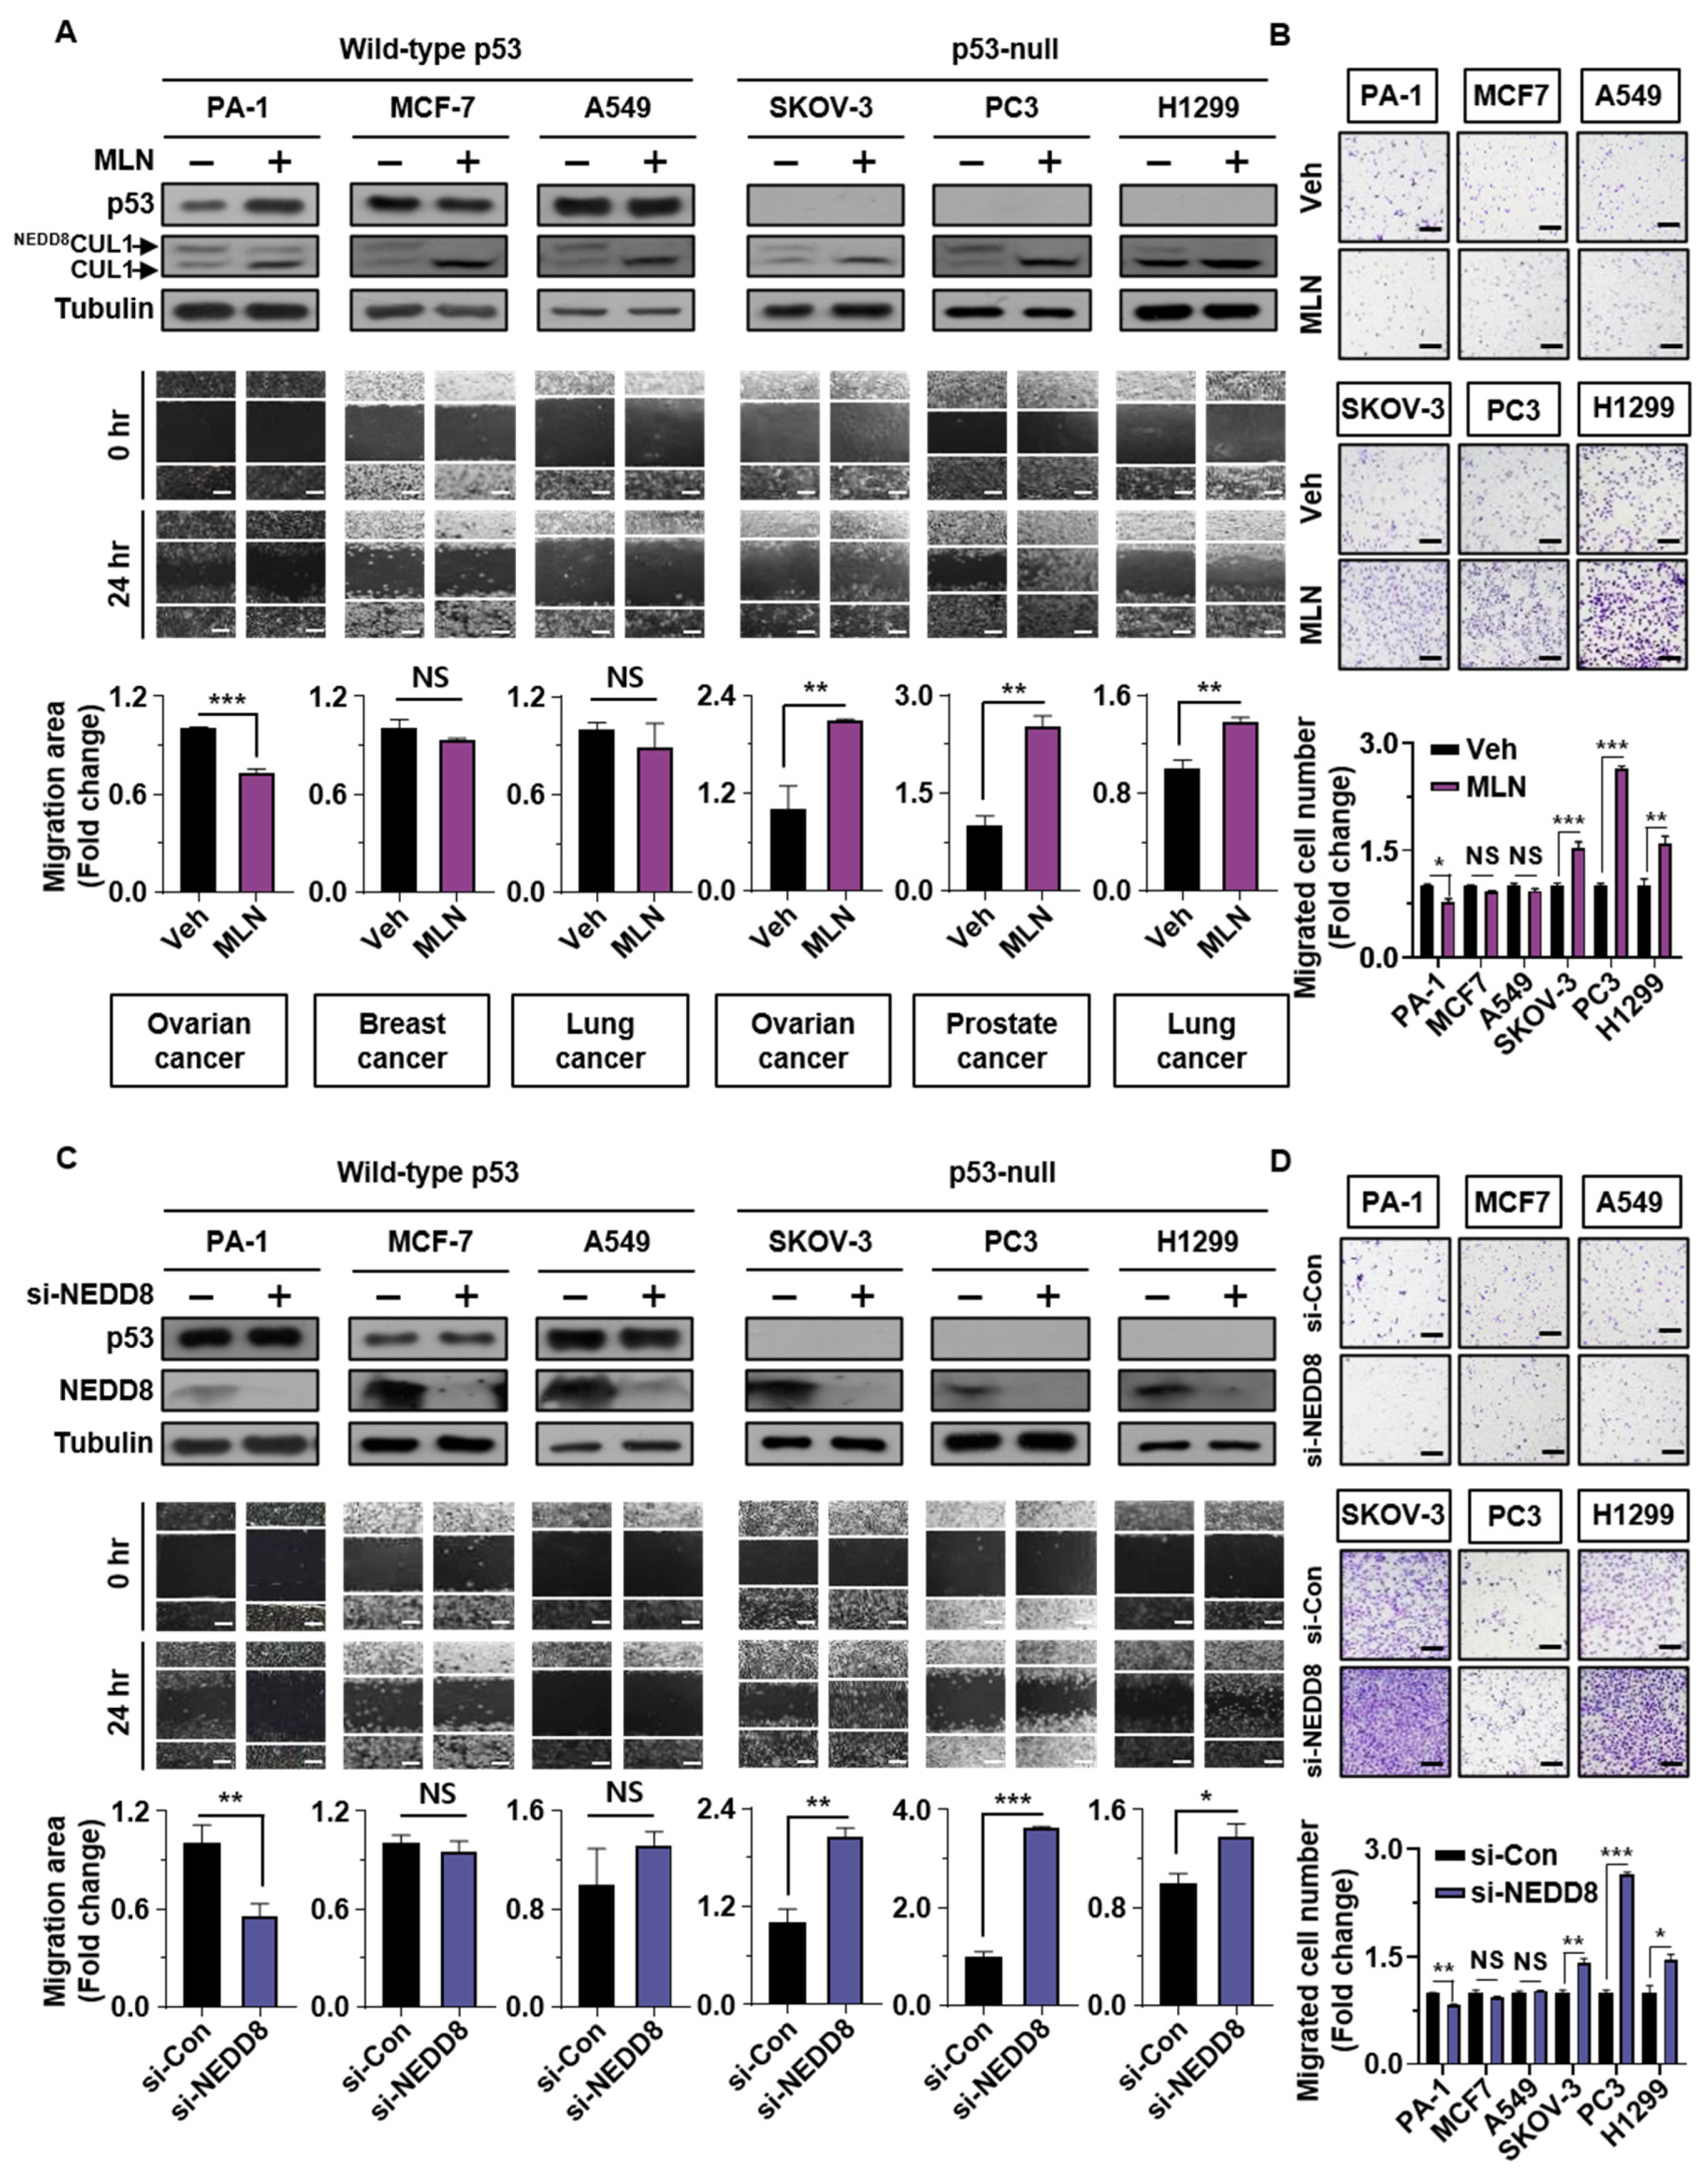 Cancers | Free Full-Text | The Effect Neddylation Blockade Slug-Dependent Cancer Cell Migration Is by p53 Mutation Status